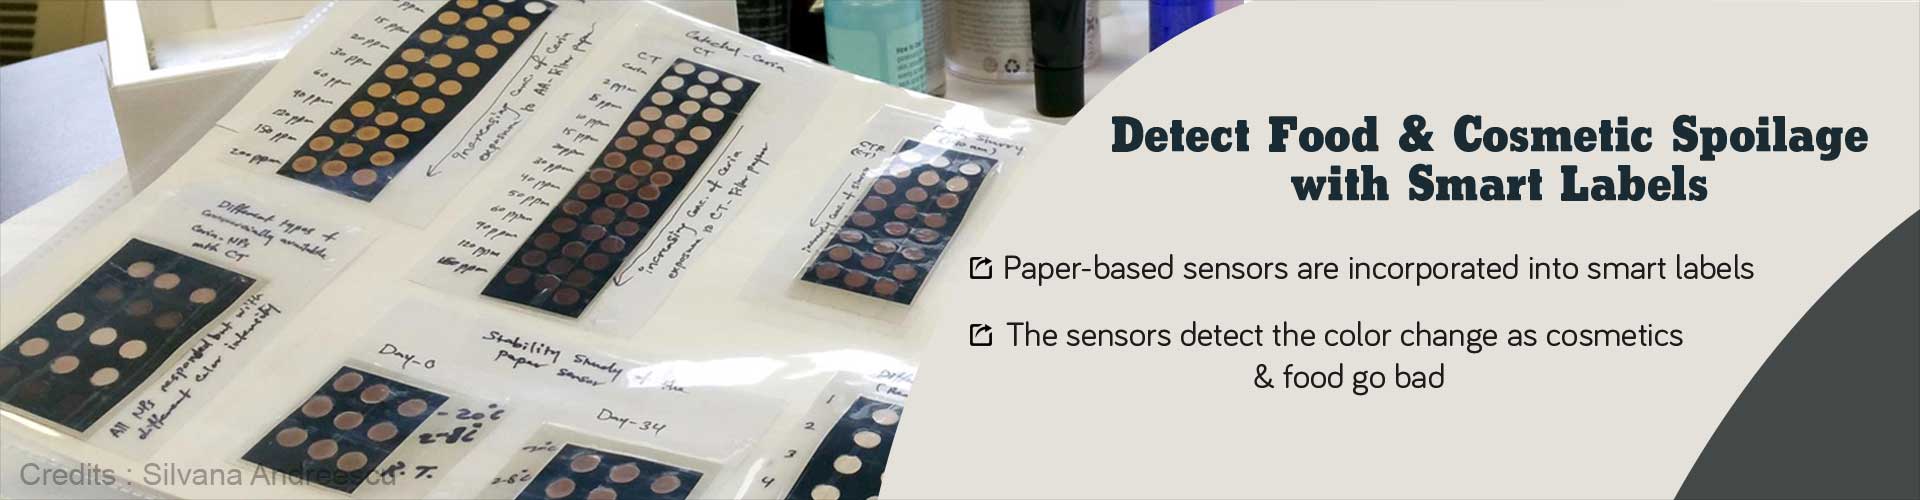 detect food & cosmetic spoilage with smart labels
- paper-based sensors are incorporated into mart labels
- the sensors detect the color change as cosmetics and food go bad 